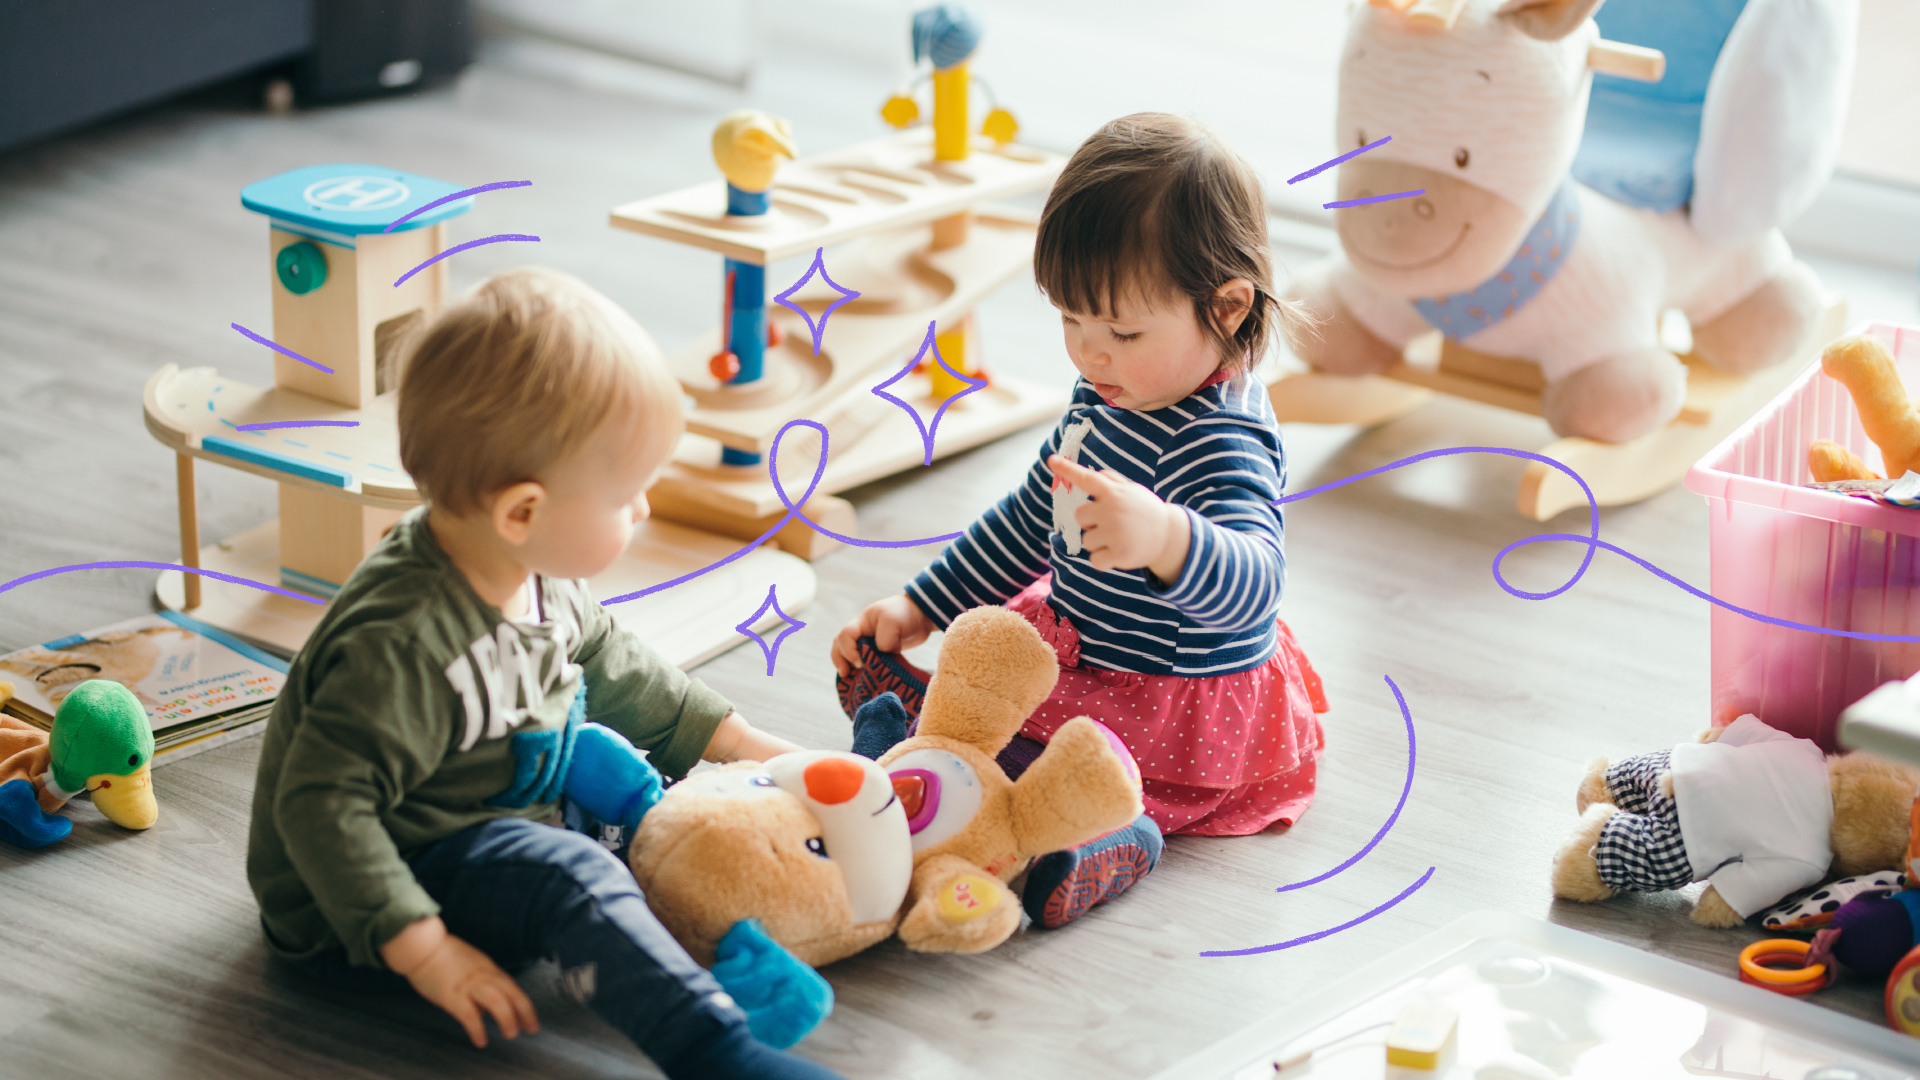 Teaching Toddlers to Share - Do’s and Don’ts